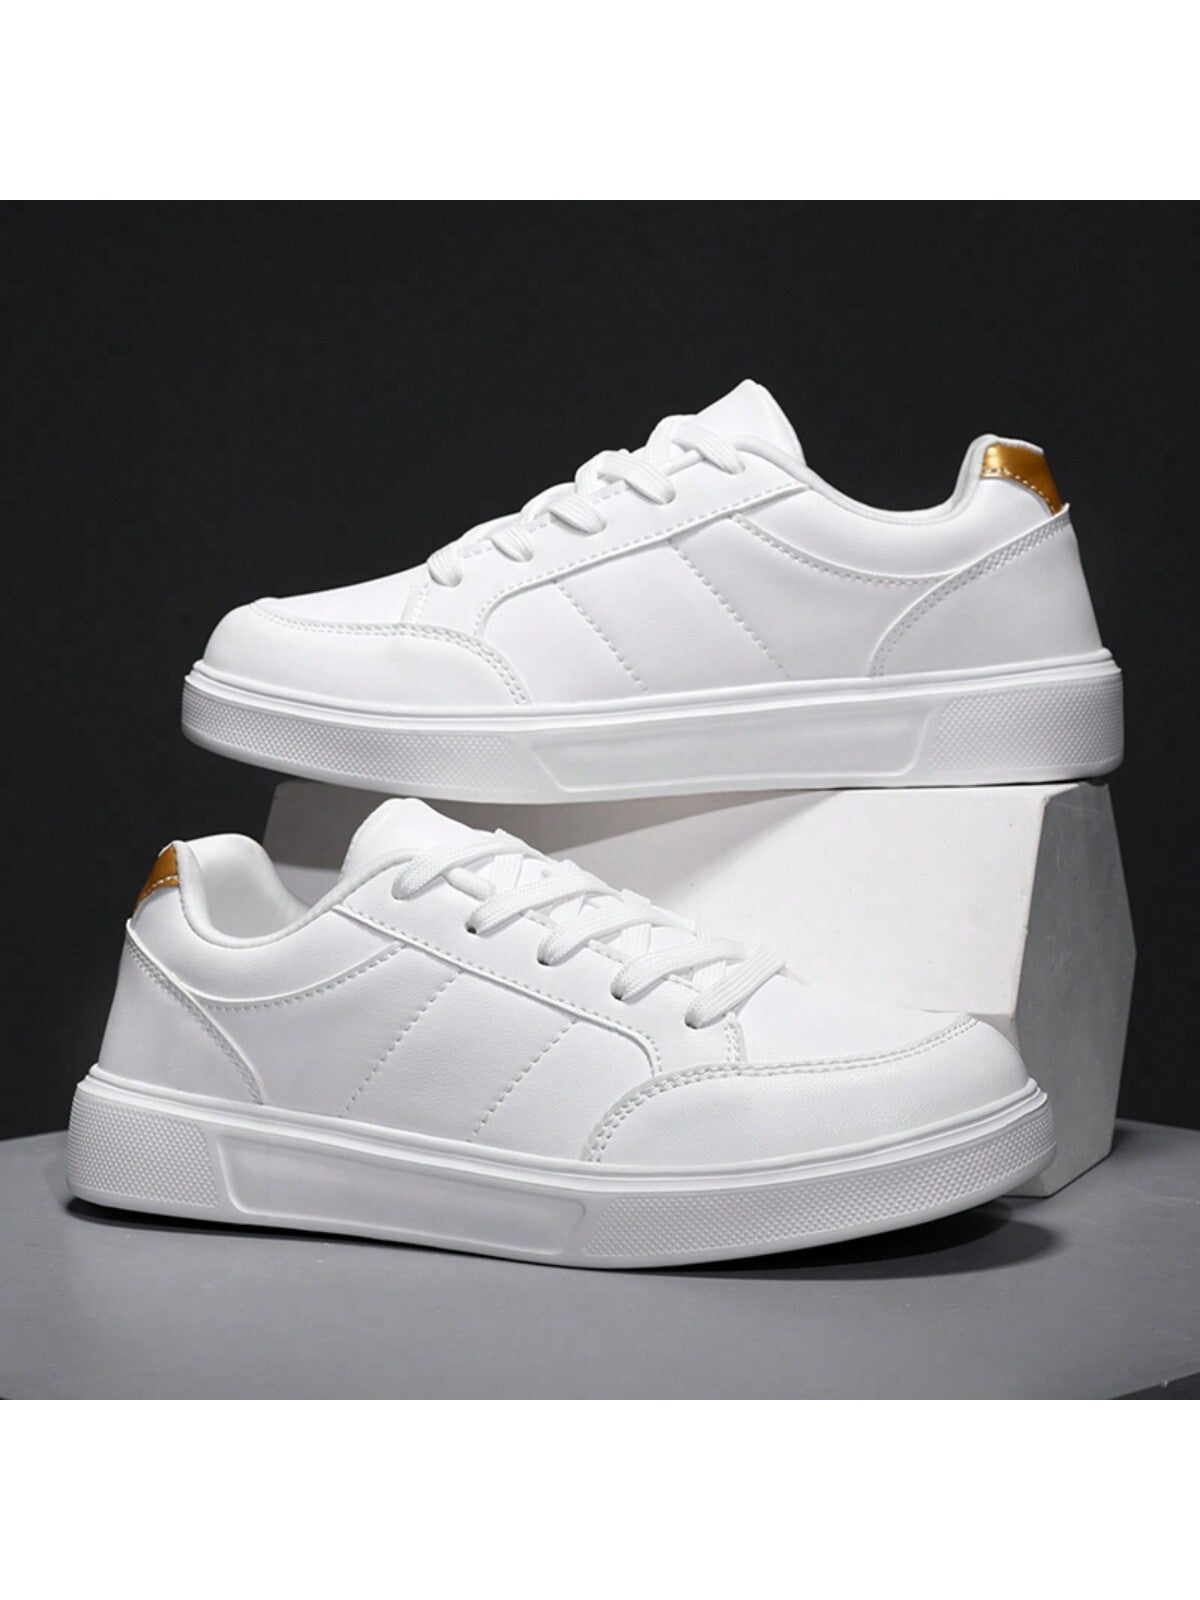 Women's White Leather Flat Casual Shoes, Fashionable, Durable, Comfortable Sneakers For Students